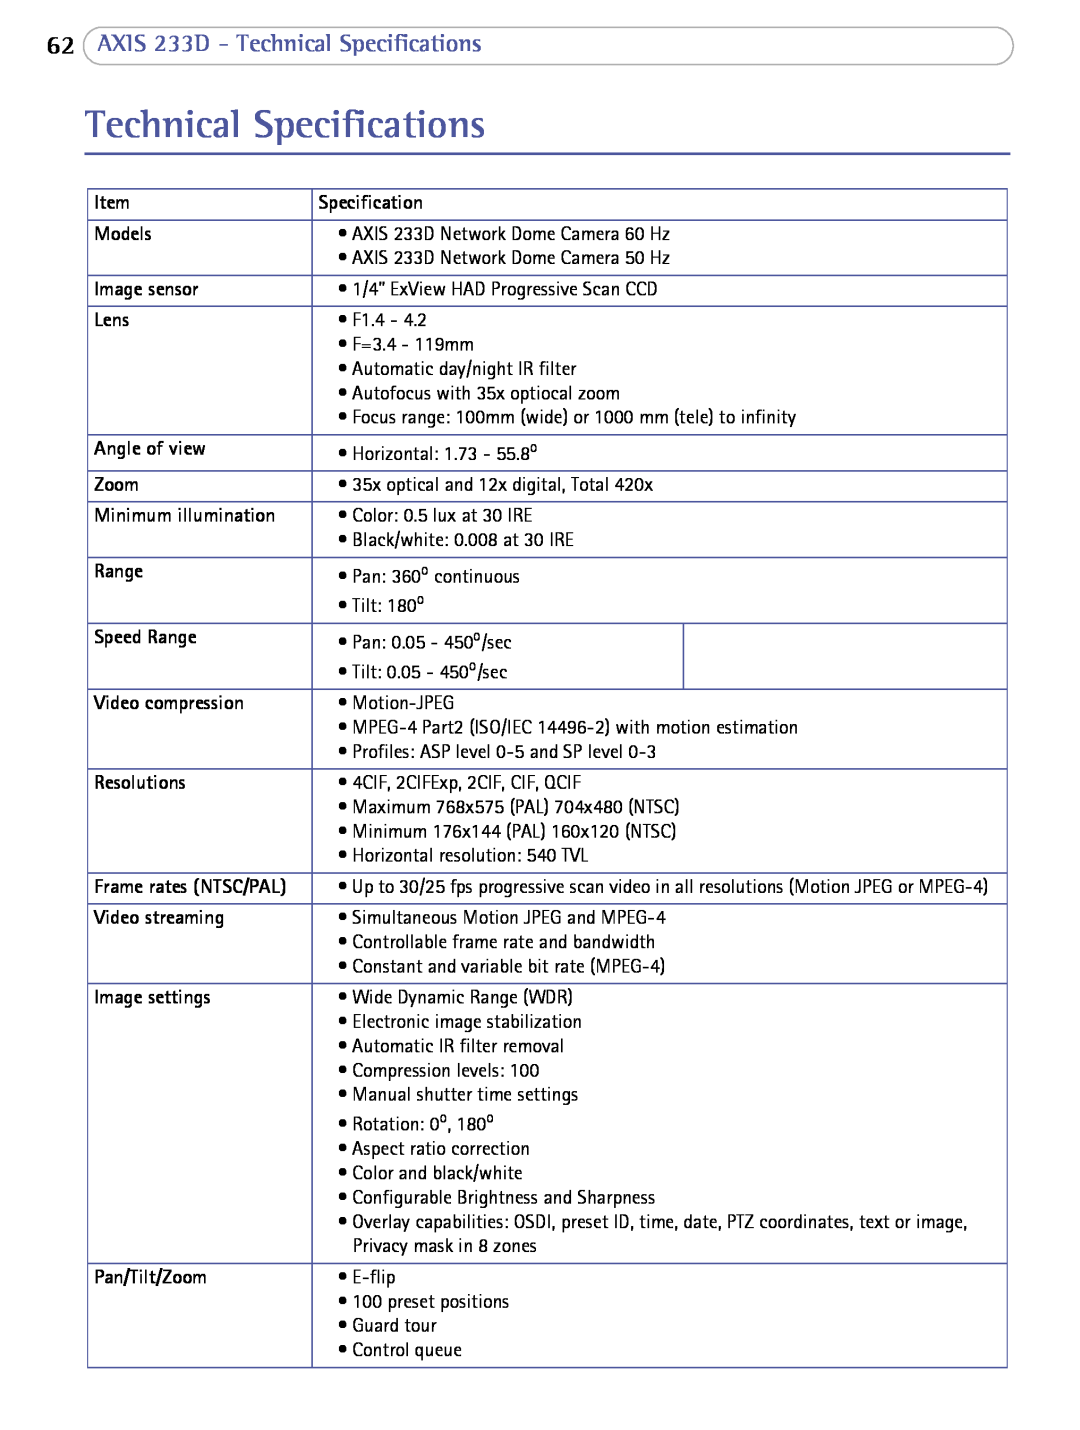 Axis Communications user manual AXIS 233D - Technical Specifications 